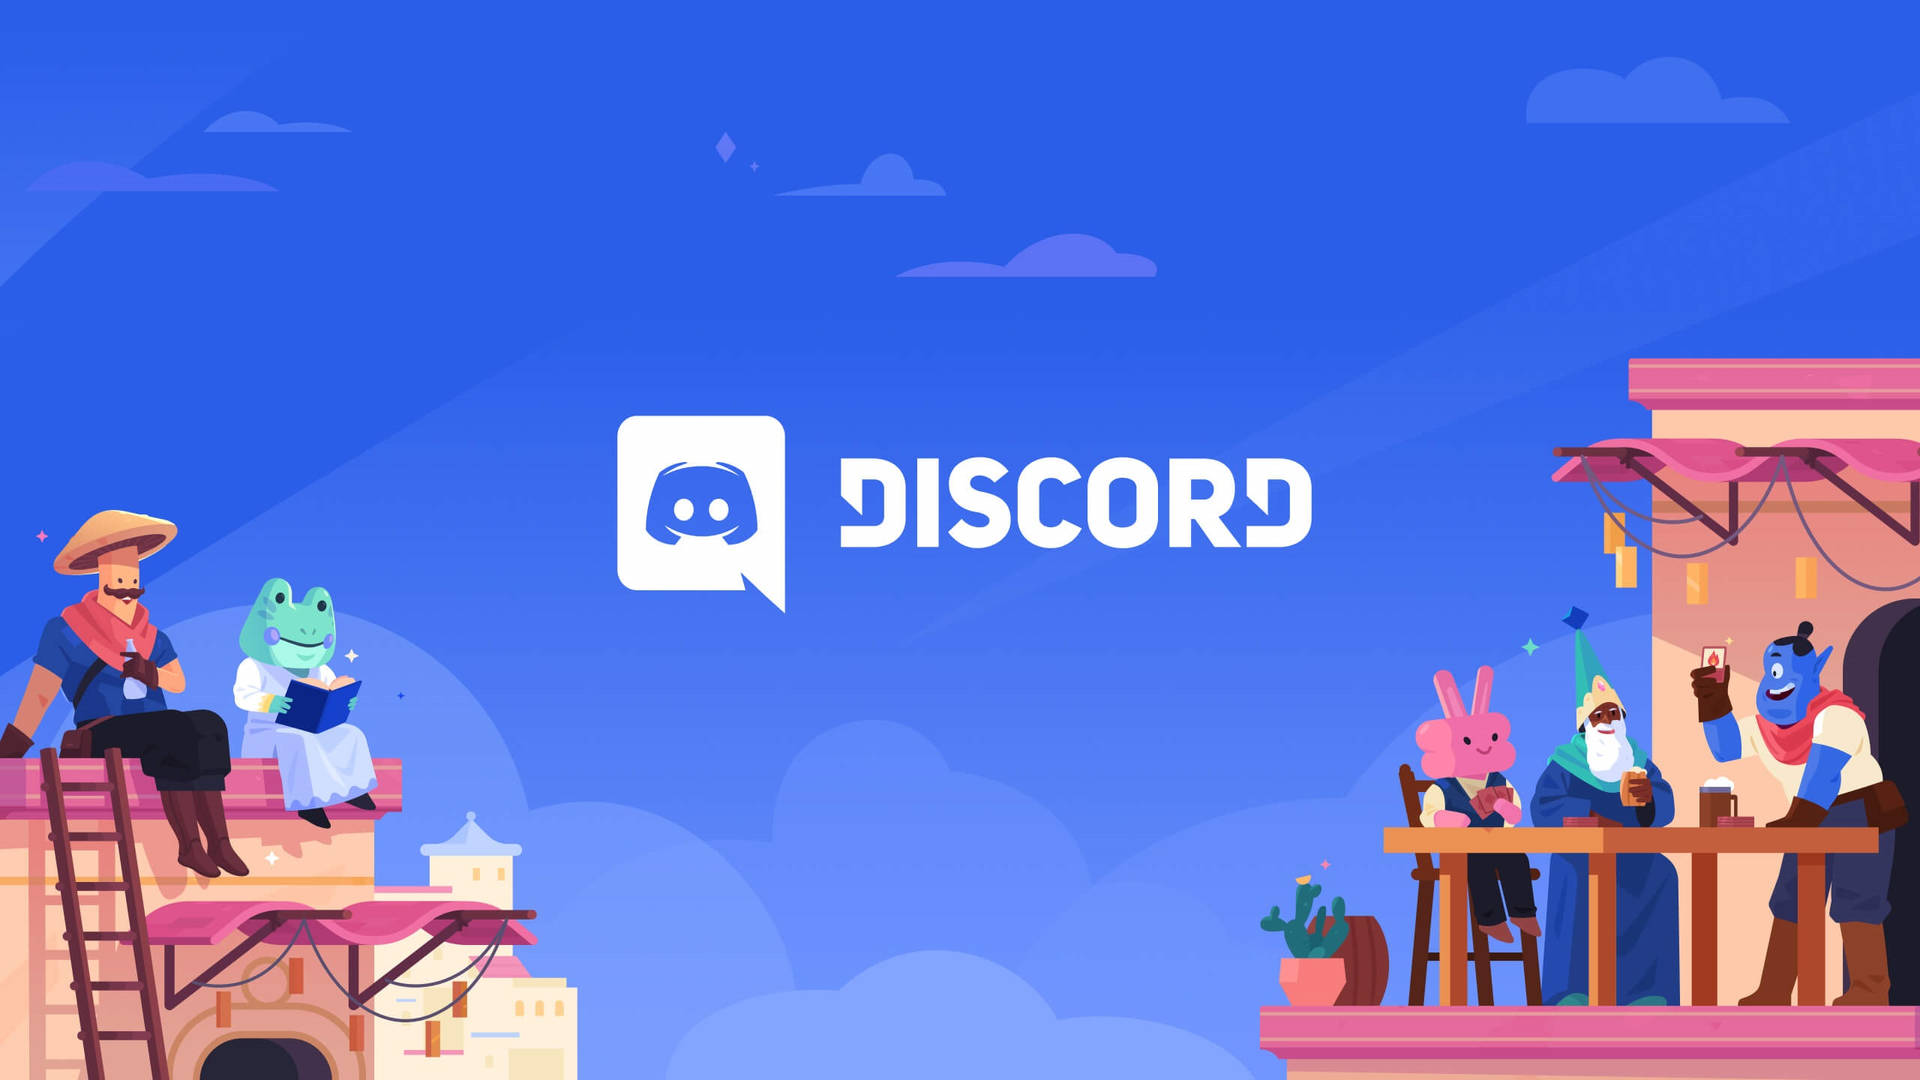 Discord Gaming Community Vector Background